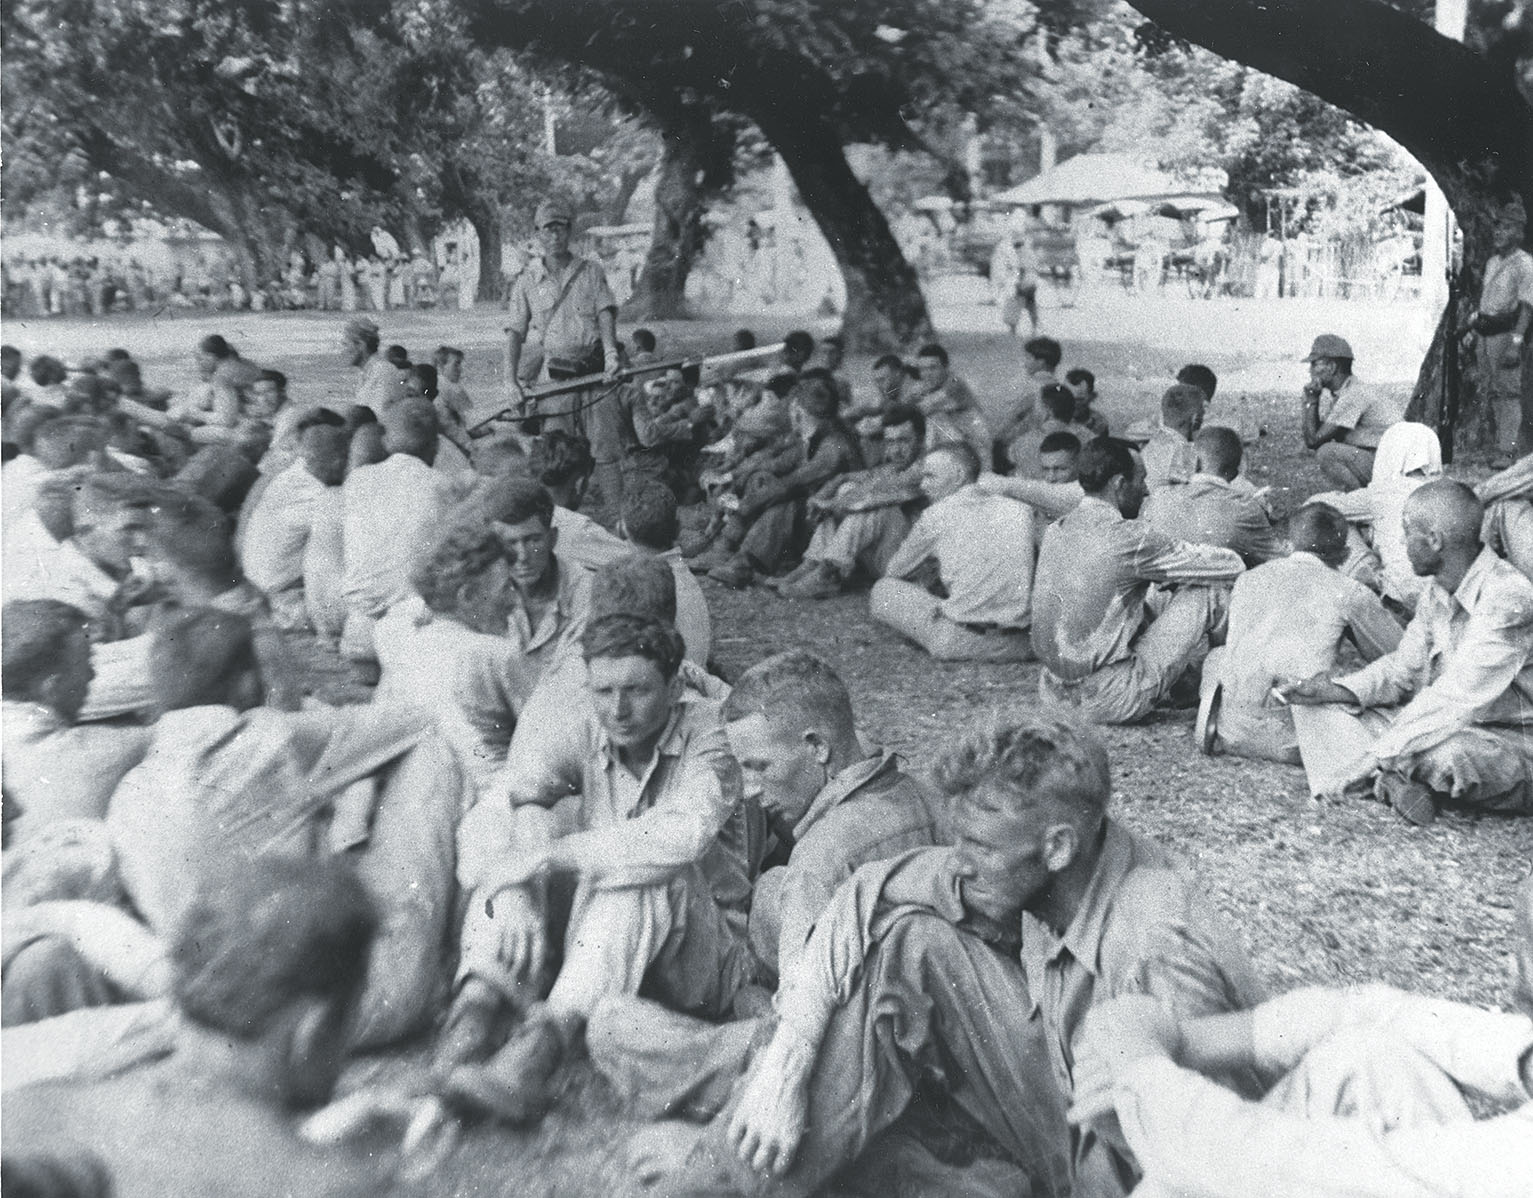 American prisoners of war sit under Japanese guard before the start of the Bataan Death March. Yamashita evaded responsibility for the march. / U.S. Marine Corps